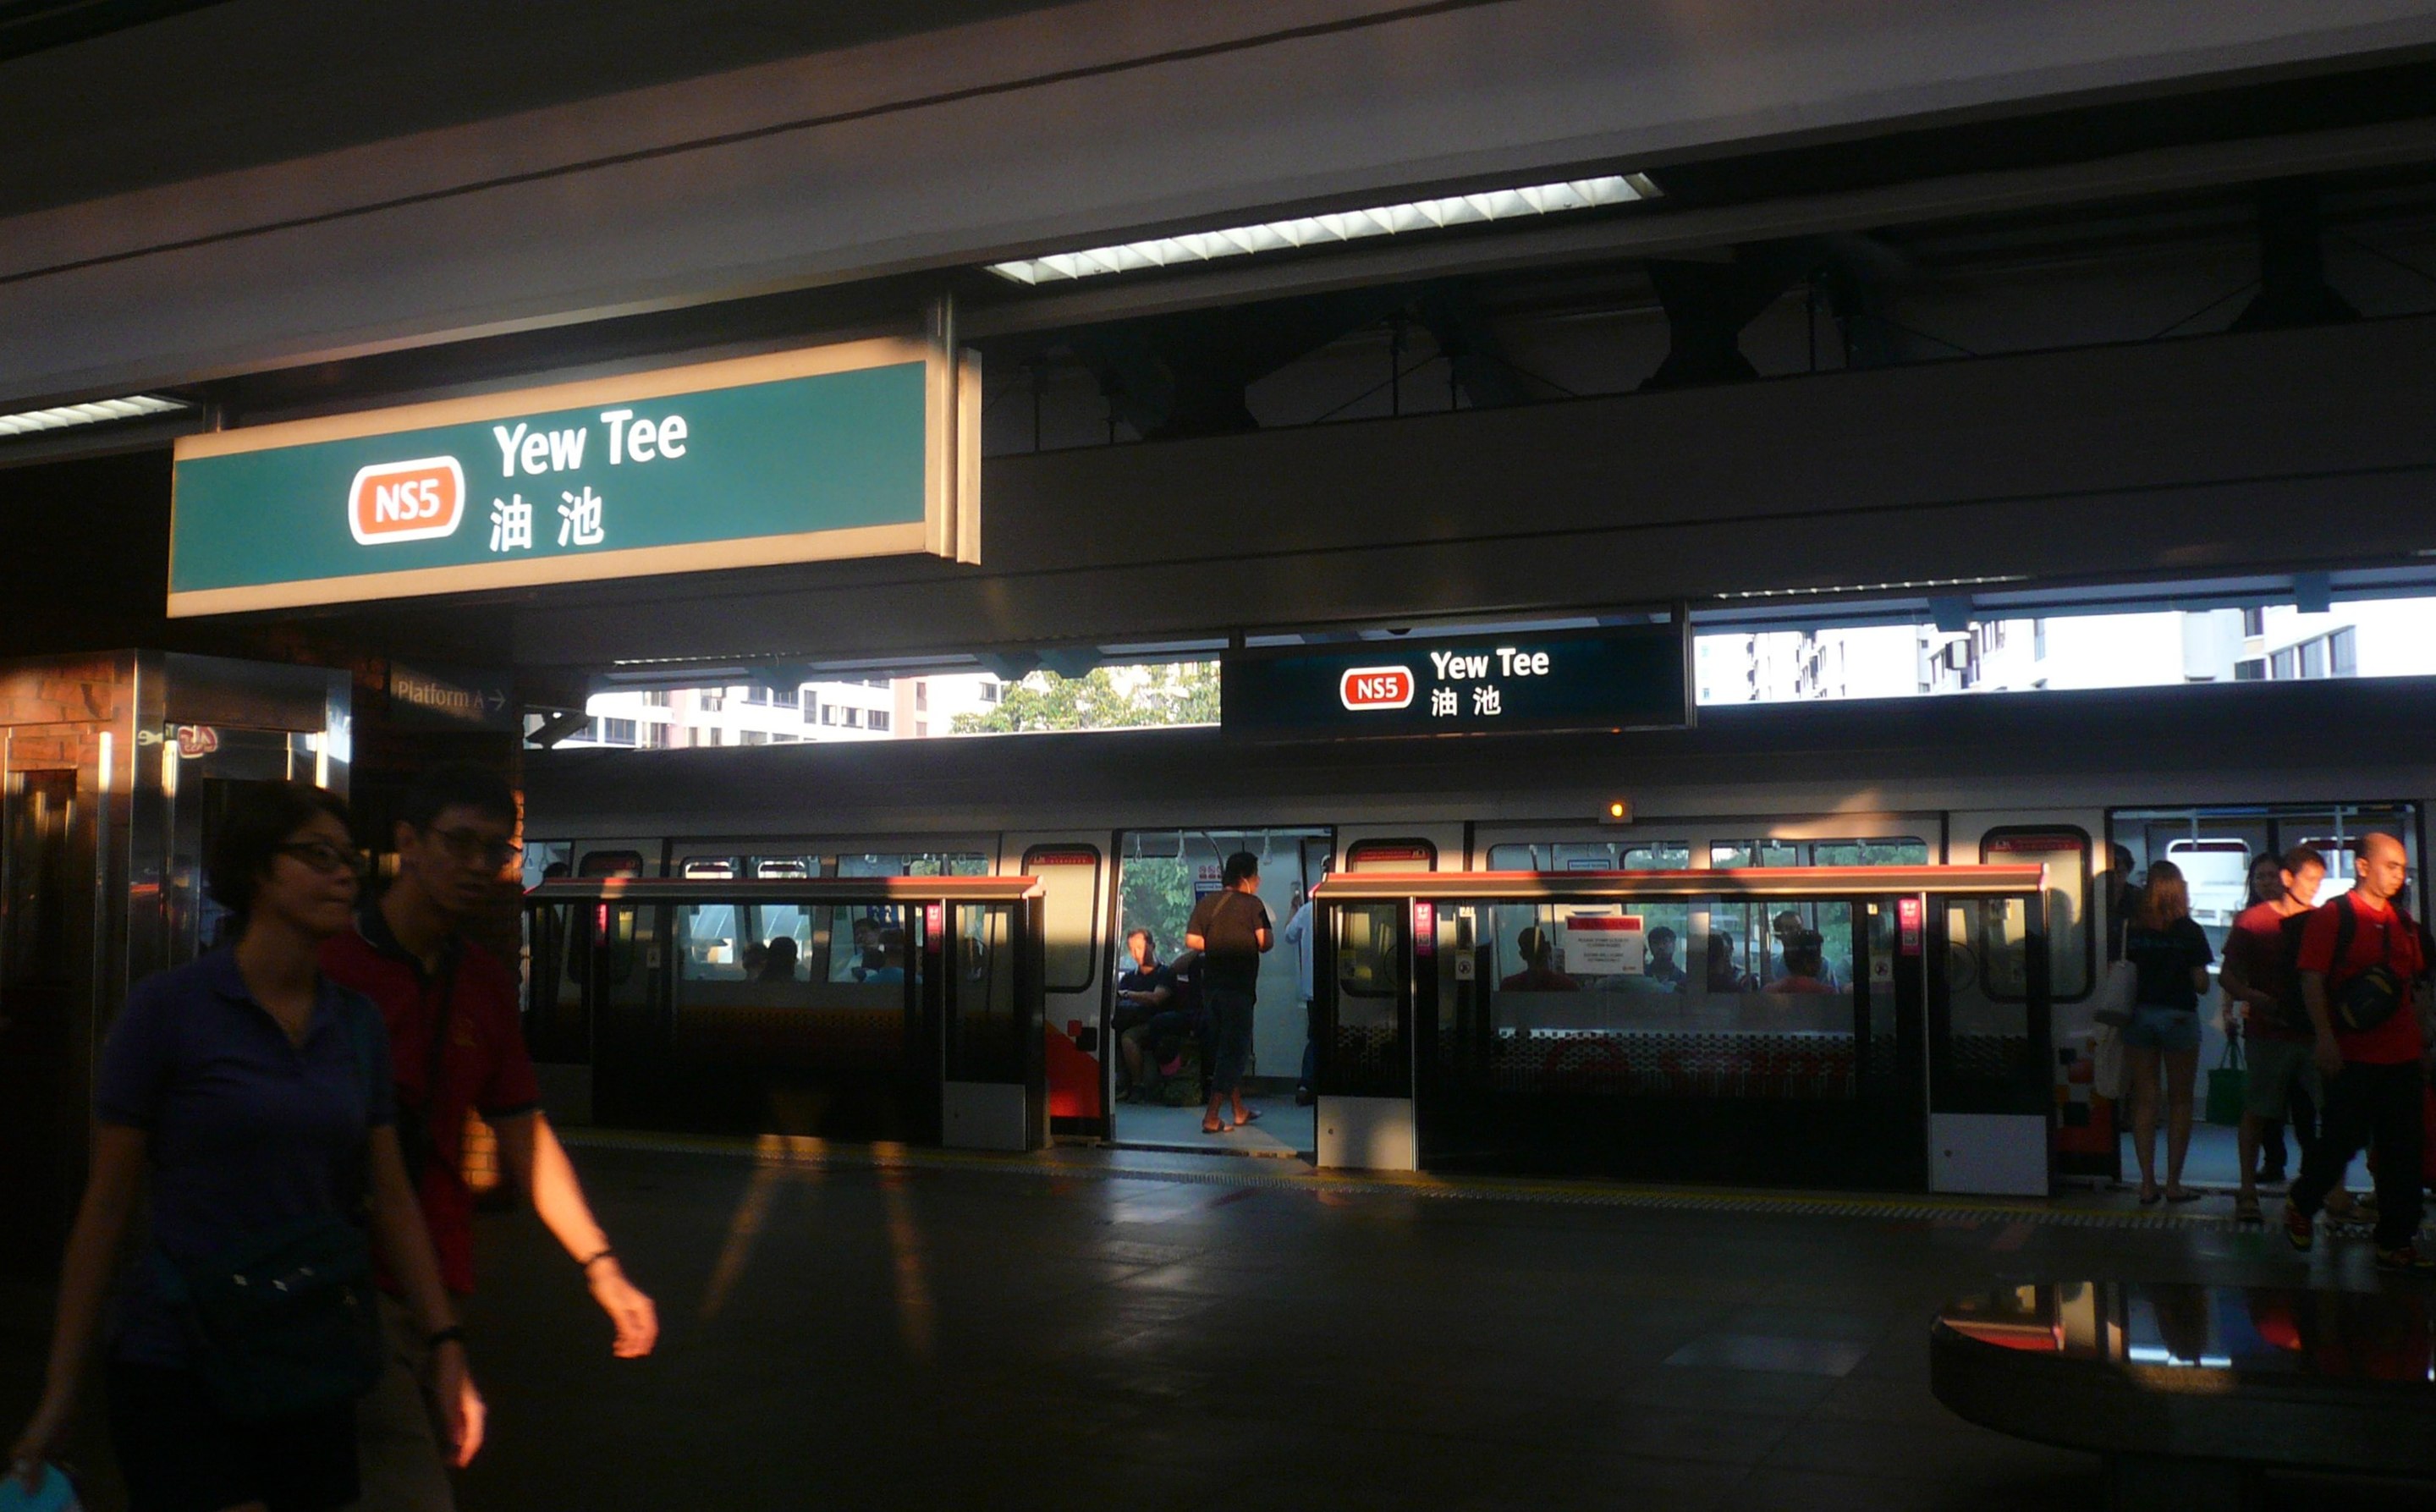 NS5 Yew Tee MRT Station Singapore Mrt north south red line